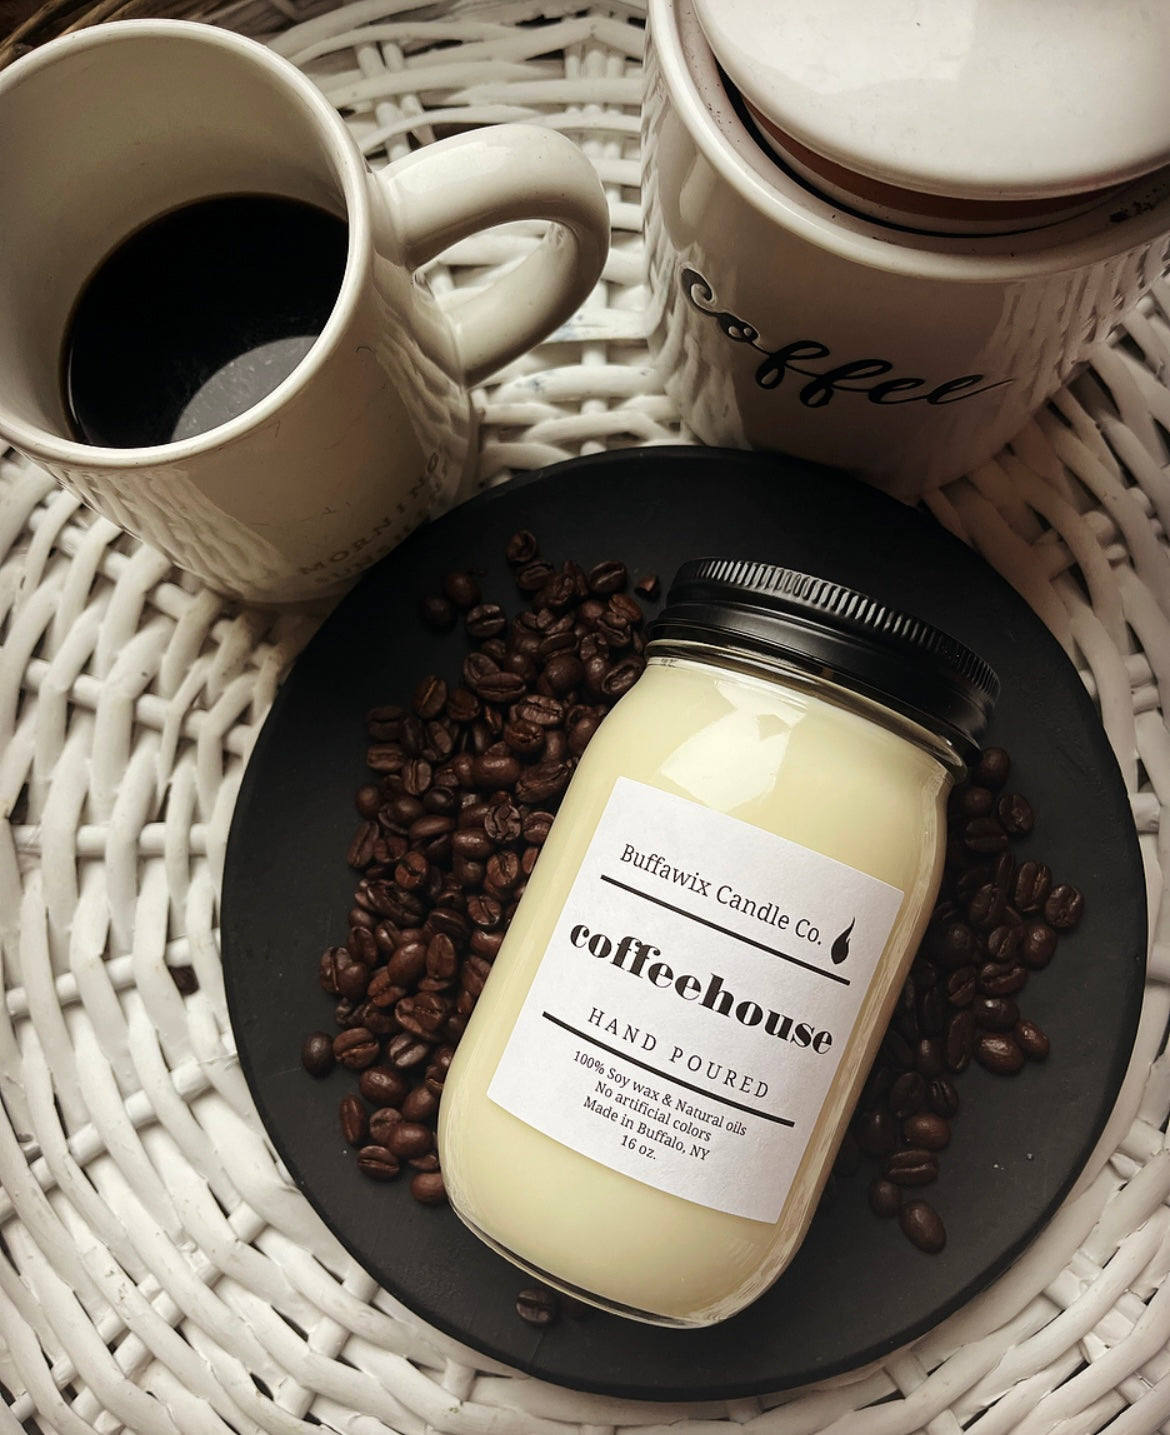 St. John’s fundraiser 16oz coffeehouse pure soy candle